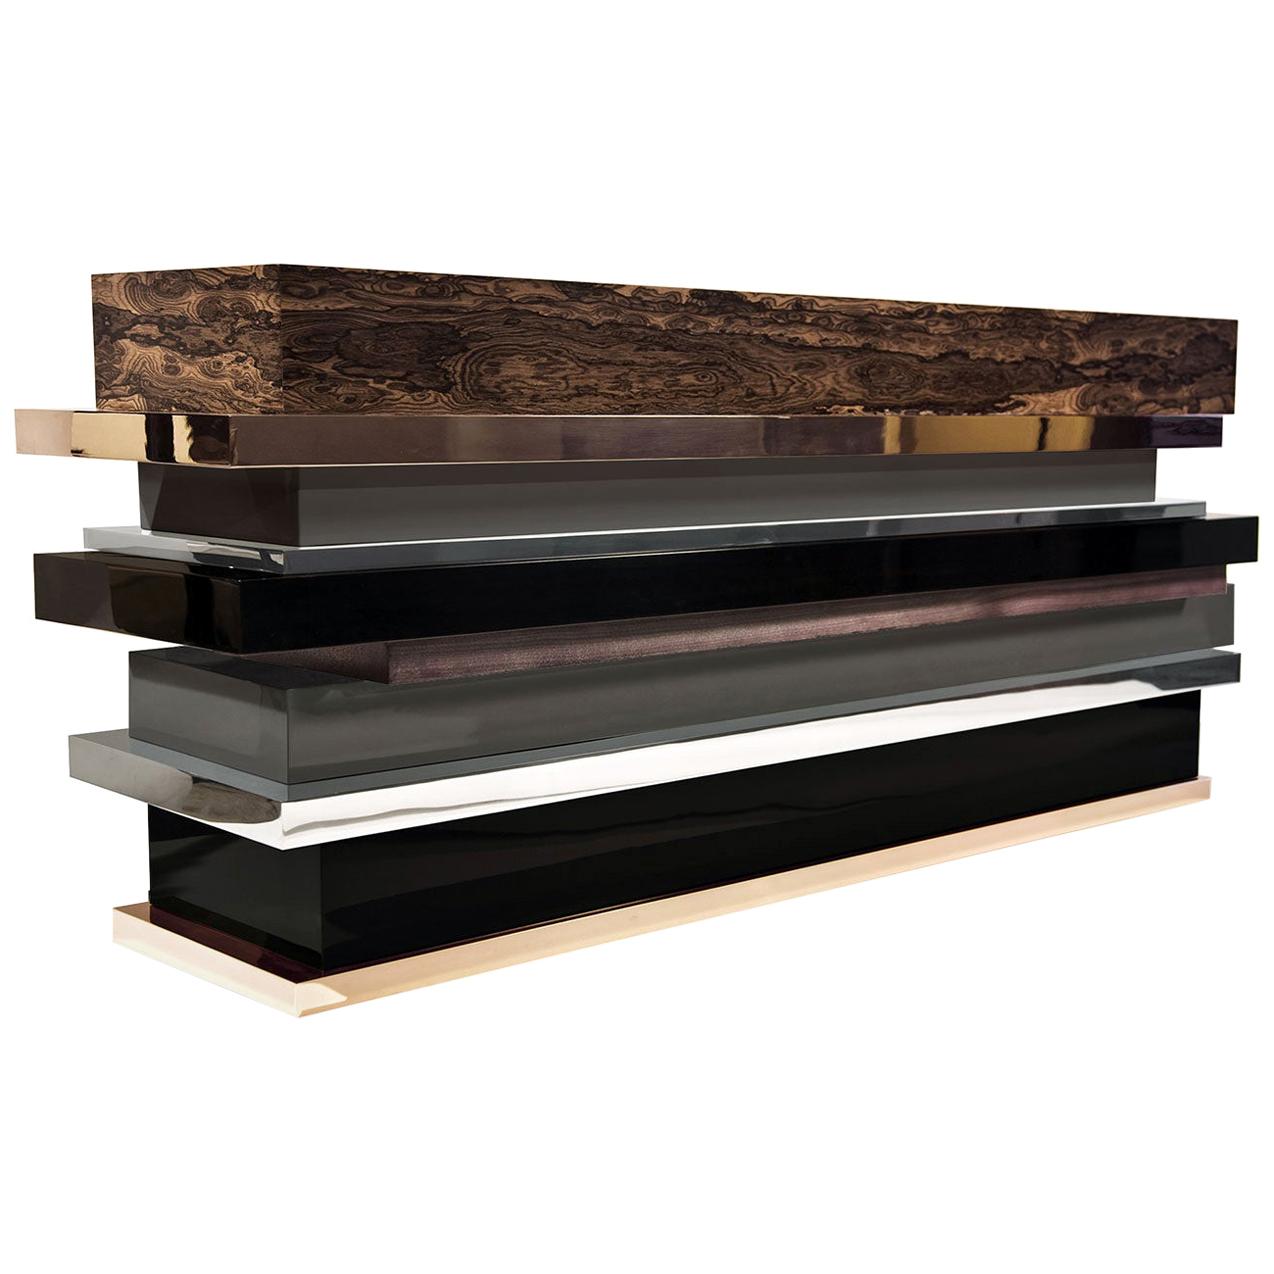 Lipstick Console: Meticulous Layers of Wood, Stainless Steel, Lacquer and Bronze